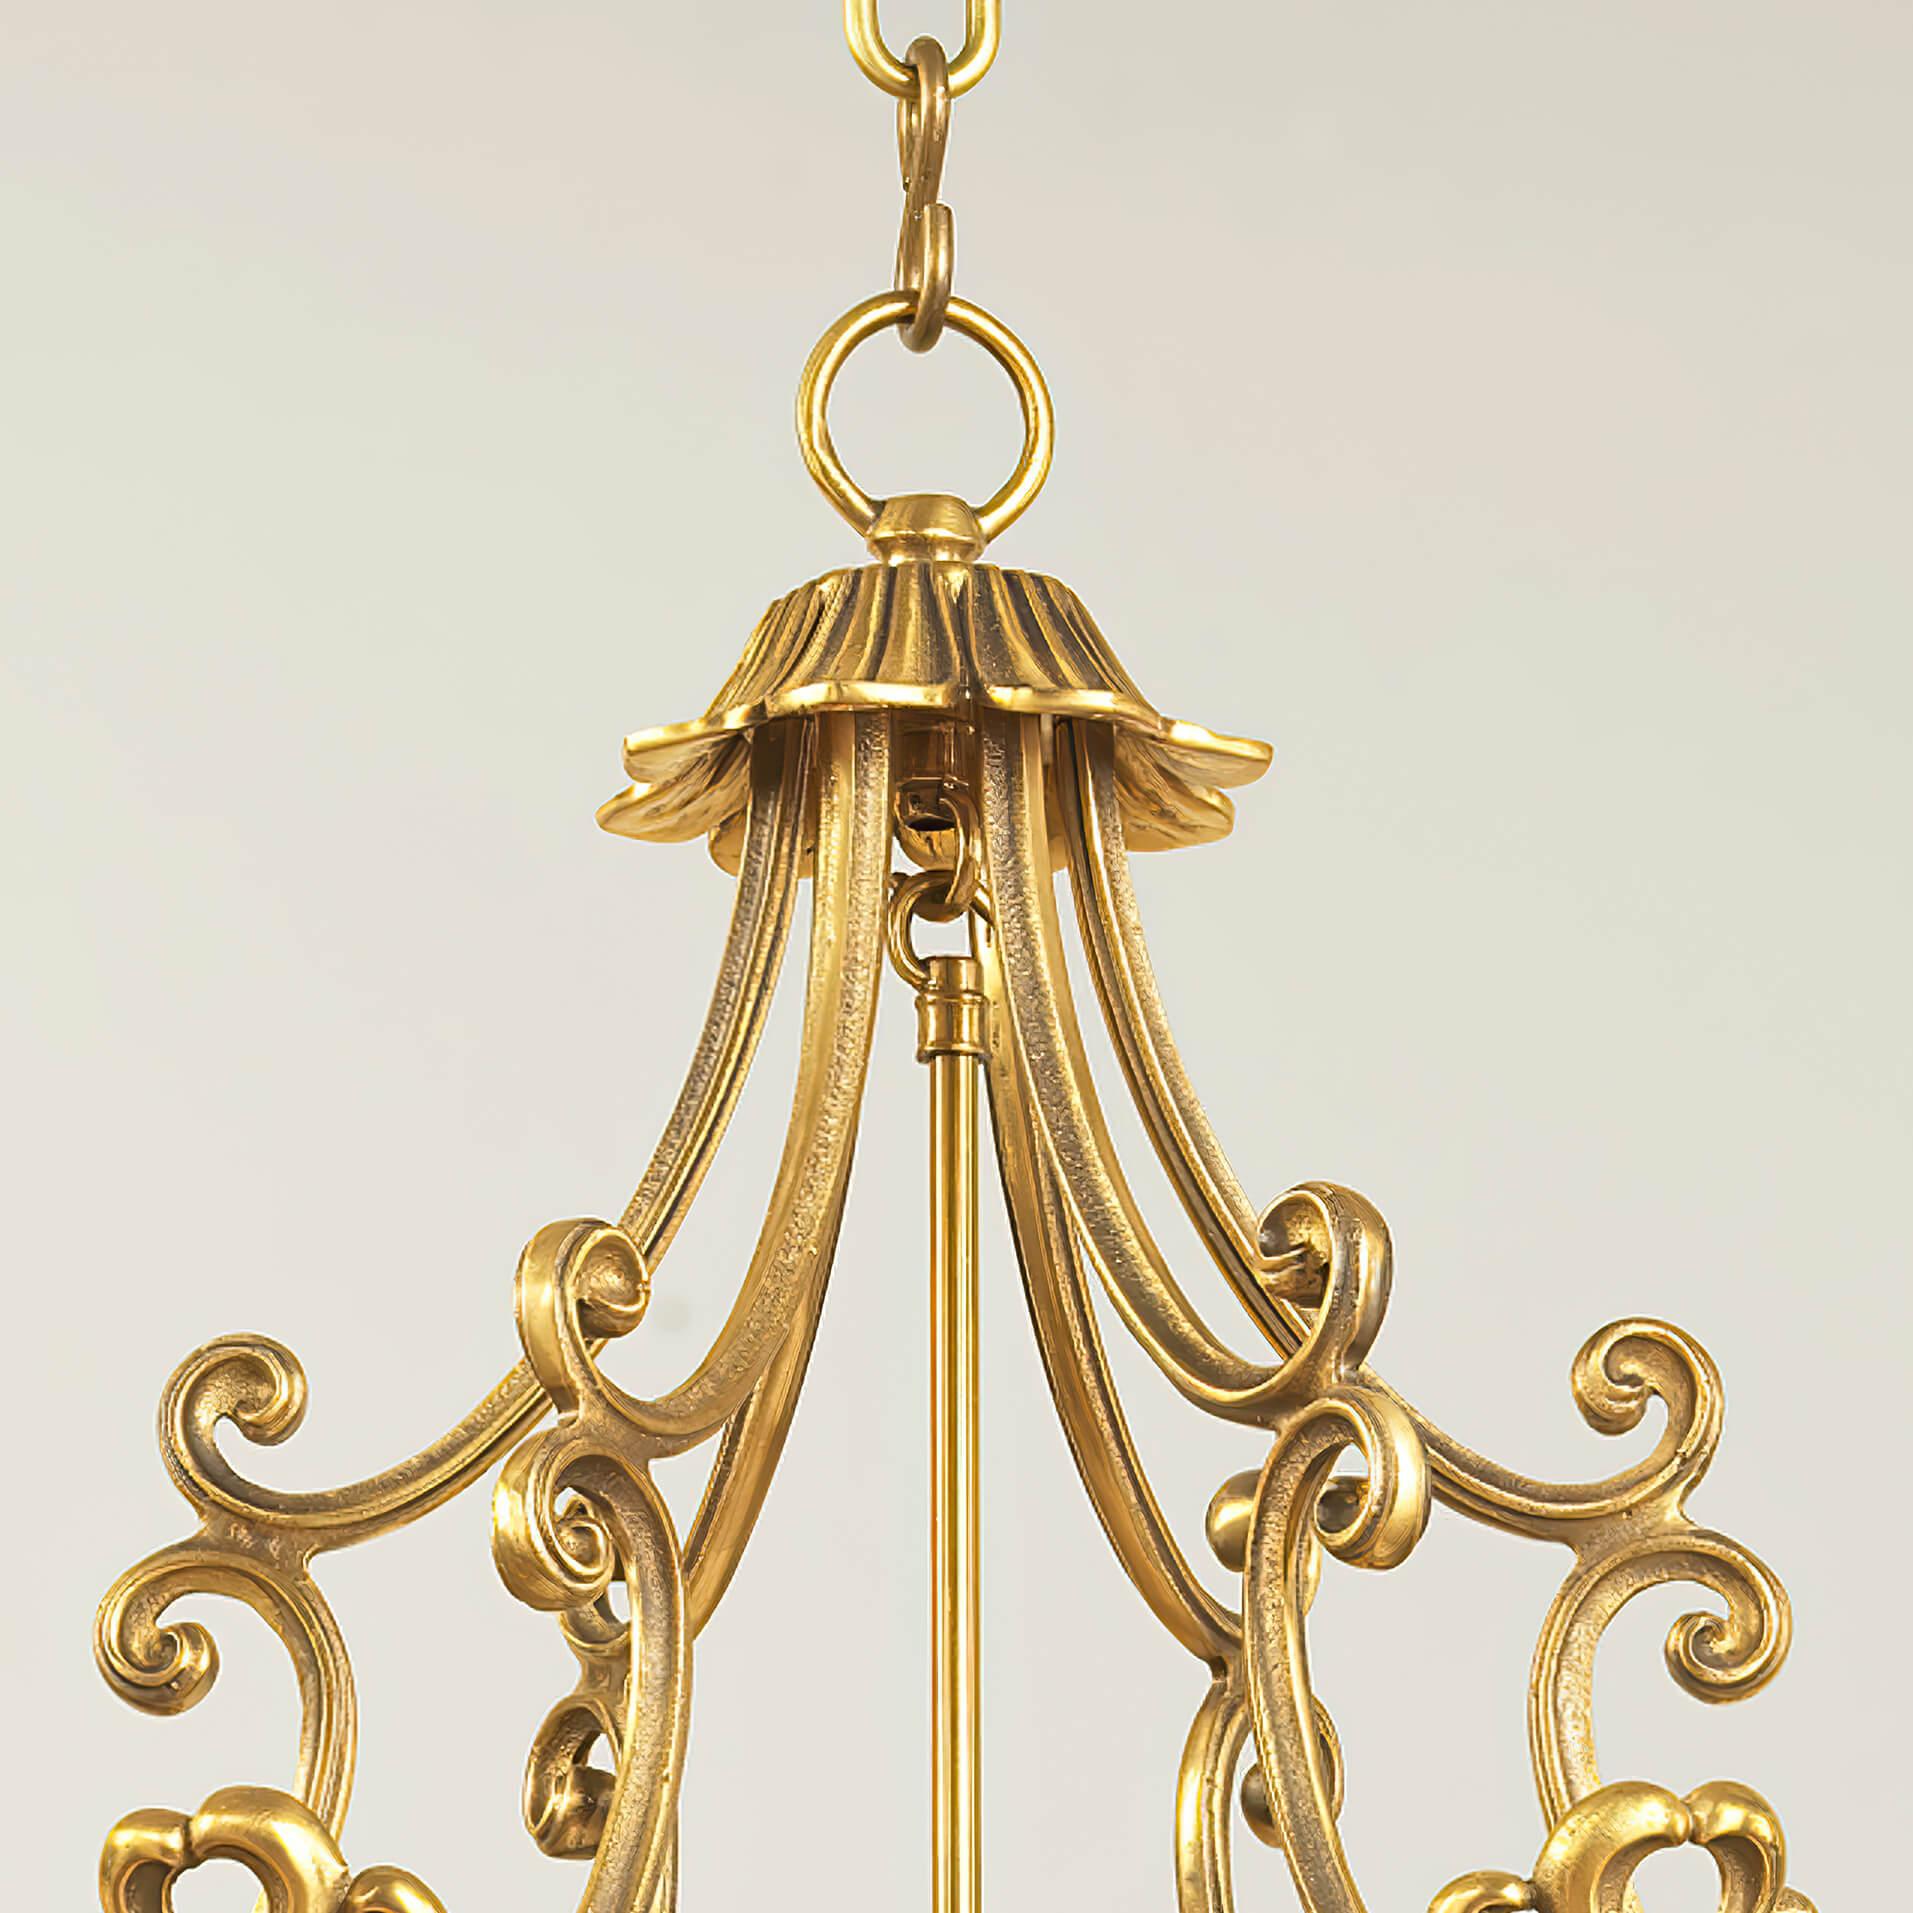 The ornate Georgian brass hexagonal hall lantern with pagoda form scroll metal crown, with Anthemion forged mounts, six glass panels with door, a Fleur-de-lis mounted column frame with five-lights and melon ball base finials.

Dimensions: 21.5